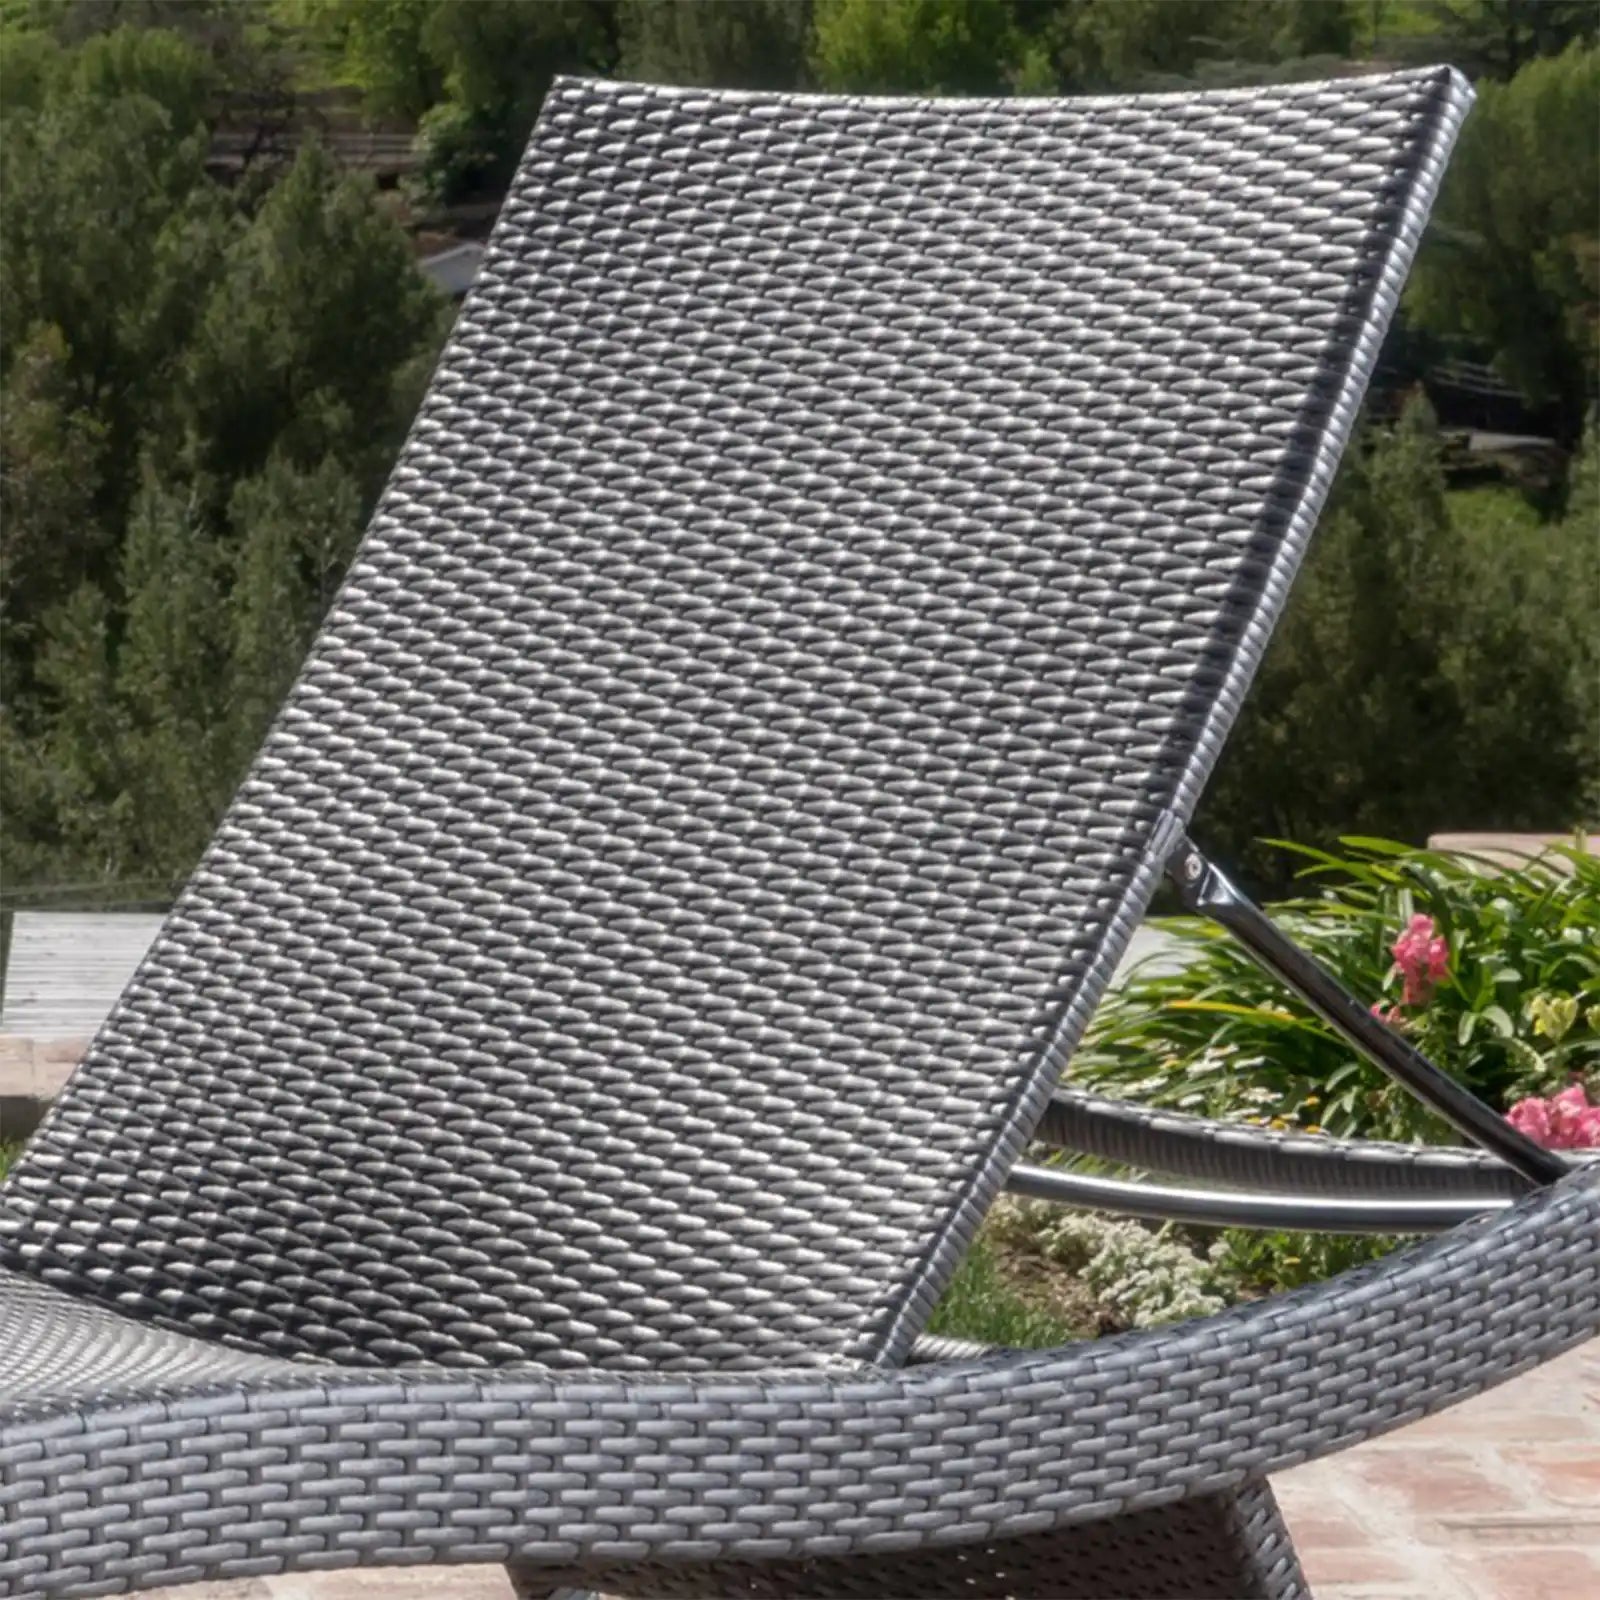 Outdoor Rattan Chaise Lounge Chair